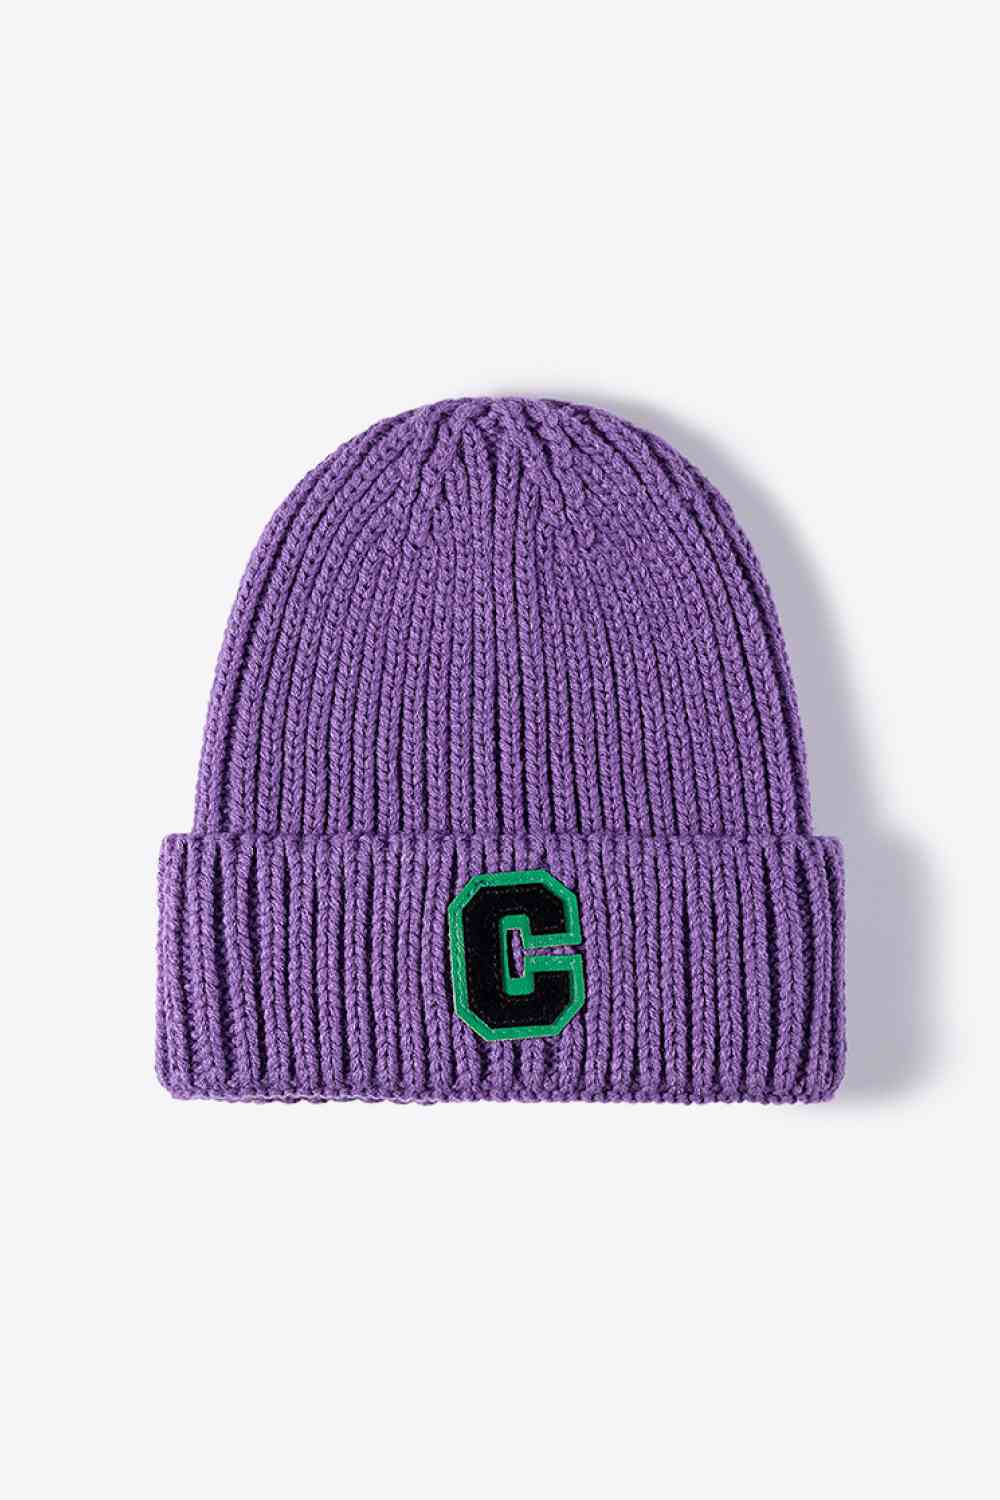 Letter C Patch Cuffed Beanie Purple One Size